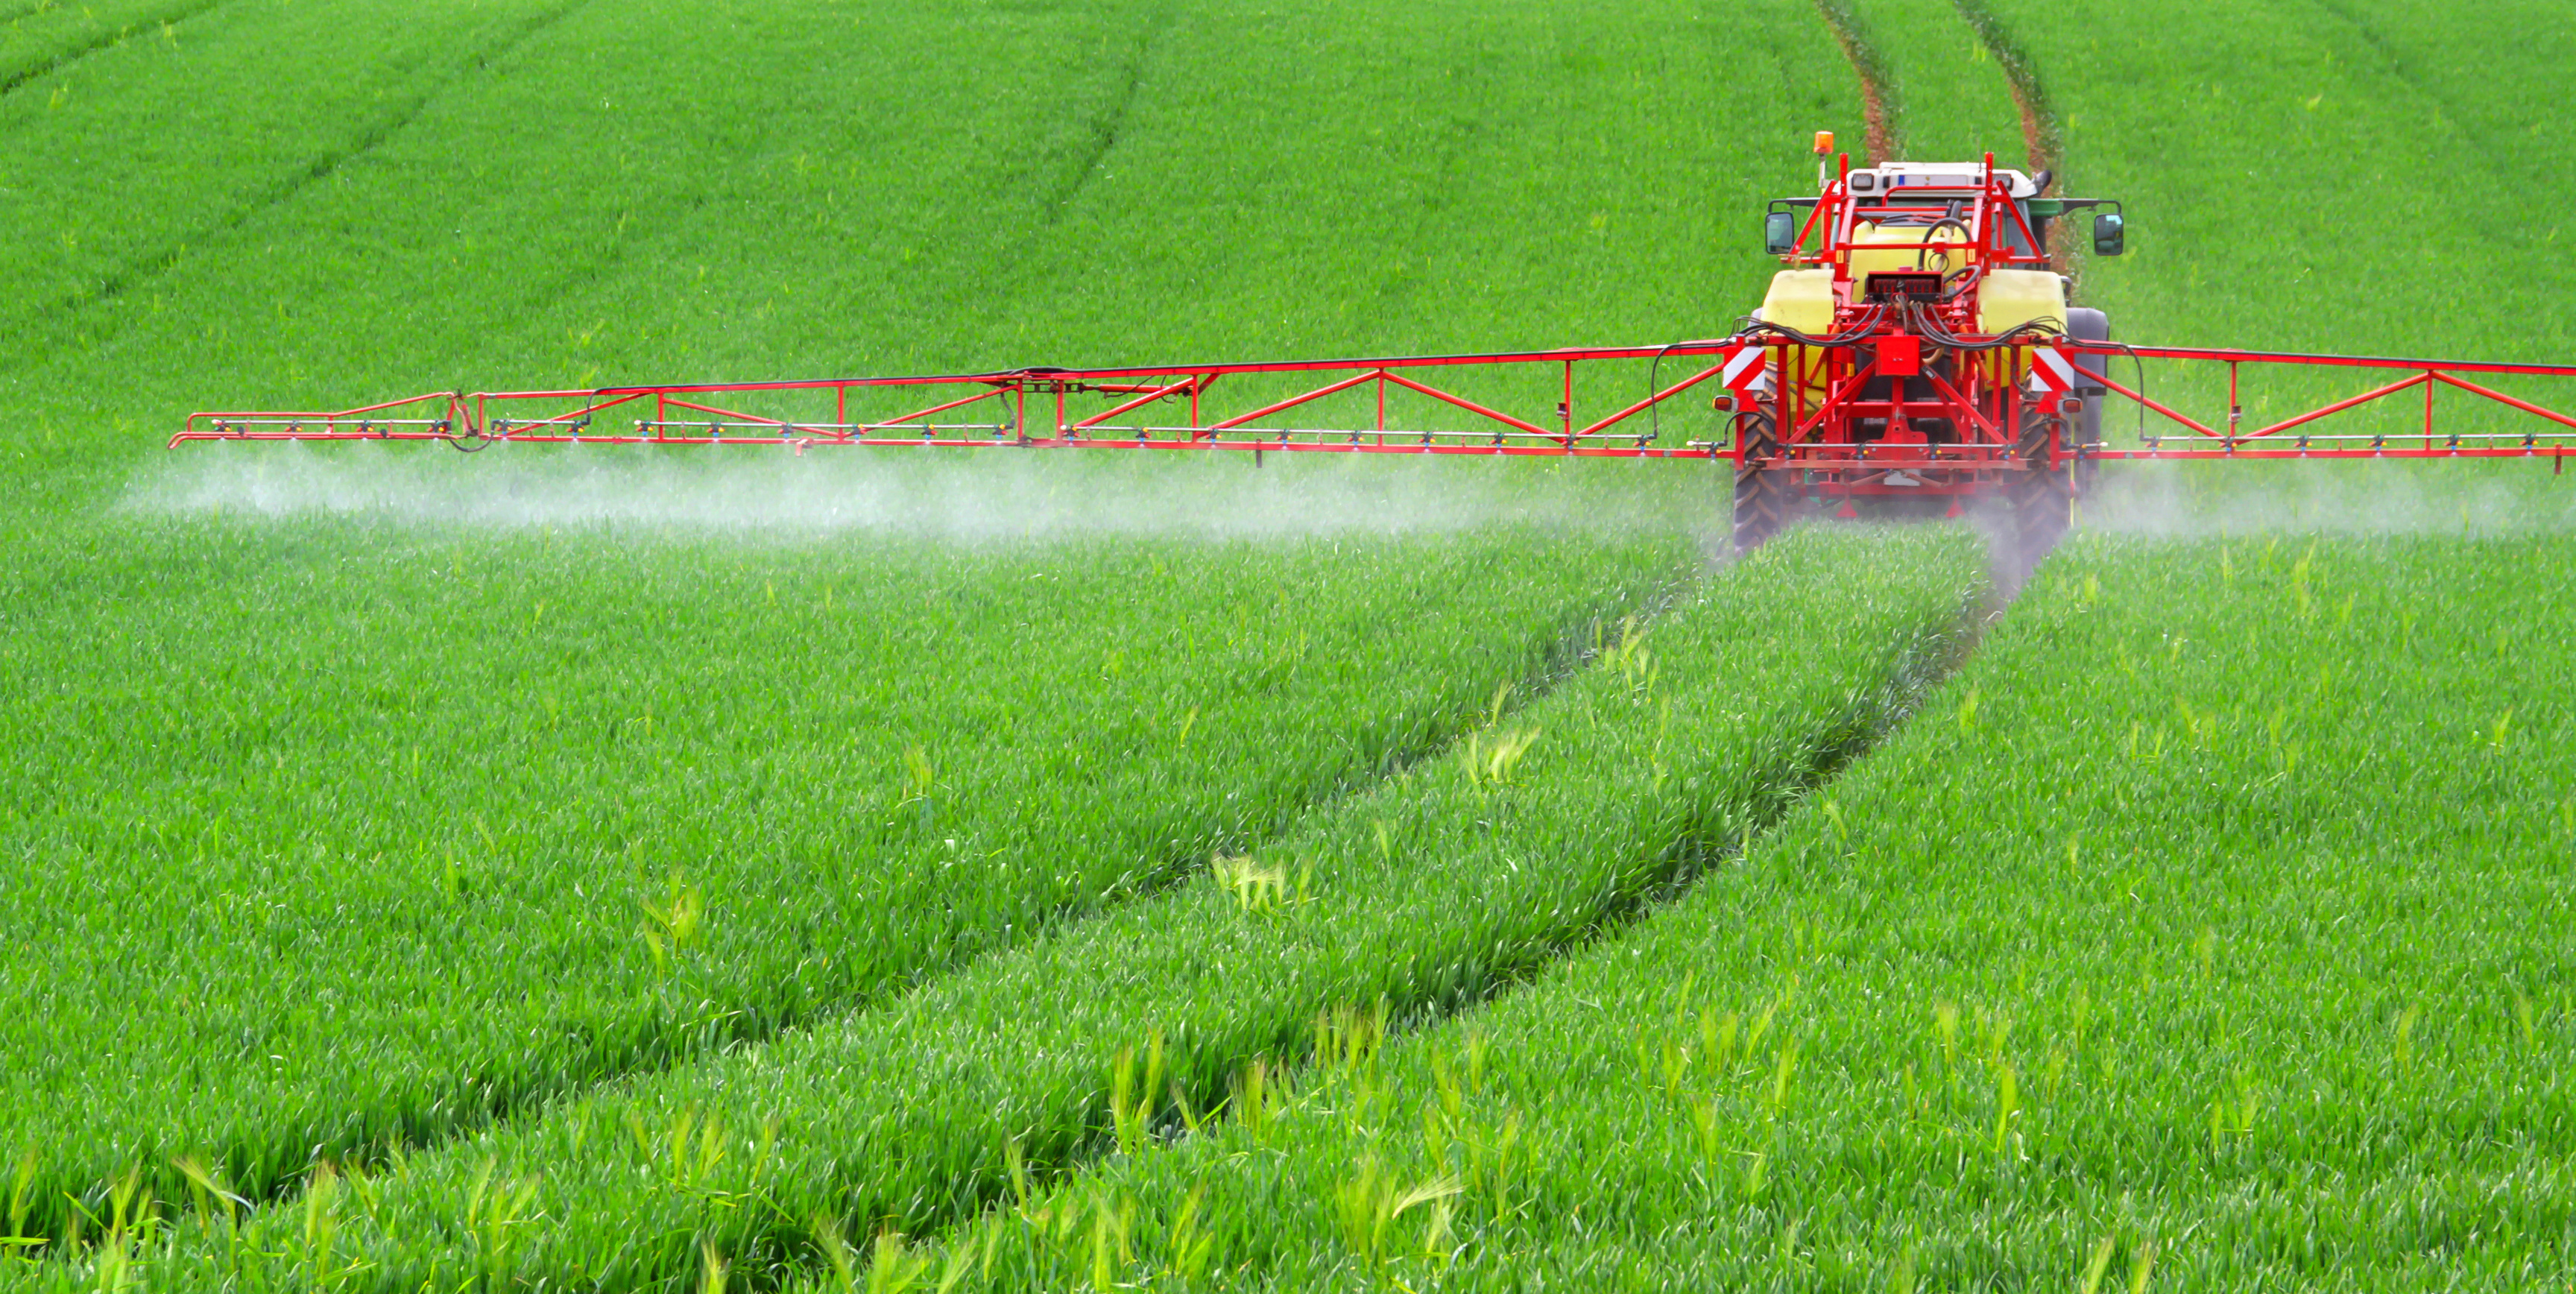 Indian Fertilizer Market 2021-2026: Size, Share, Trends, Growth, Analysis, Top Companies, and Research Report